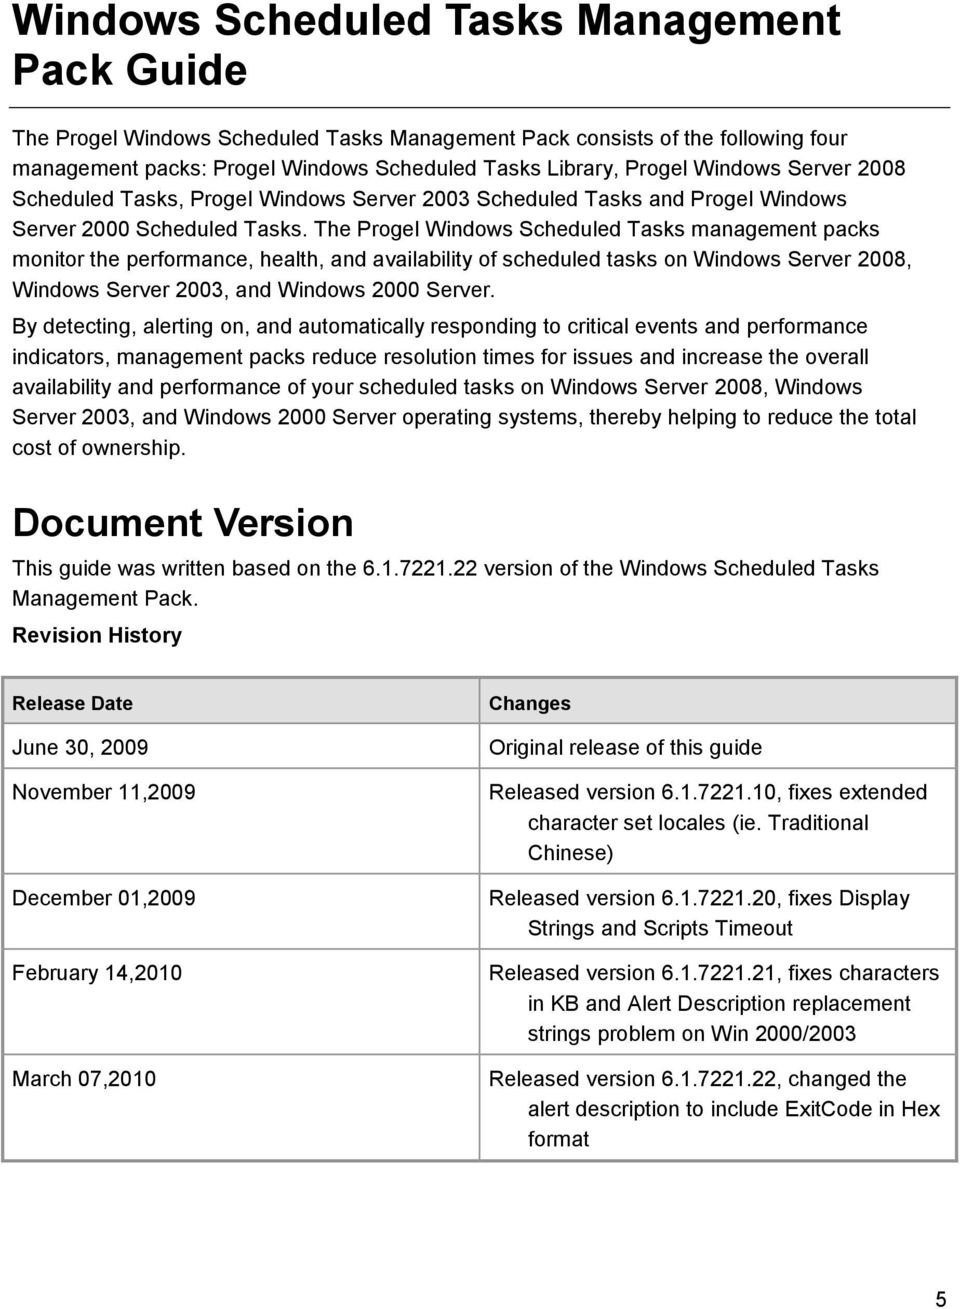 The Progel Windows Scheduled Tasks management packs monitor the performance, health, and availability of scheduled tasks on Windows Server 2008, Windows Server 2003, and Windows 2000 Server.